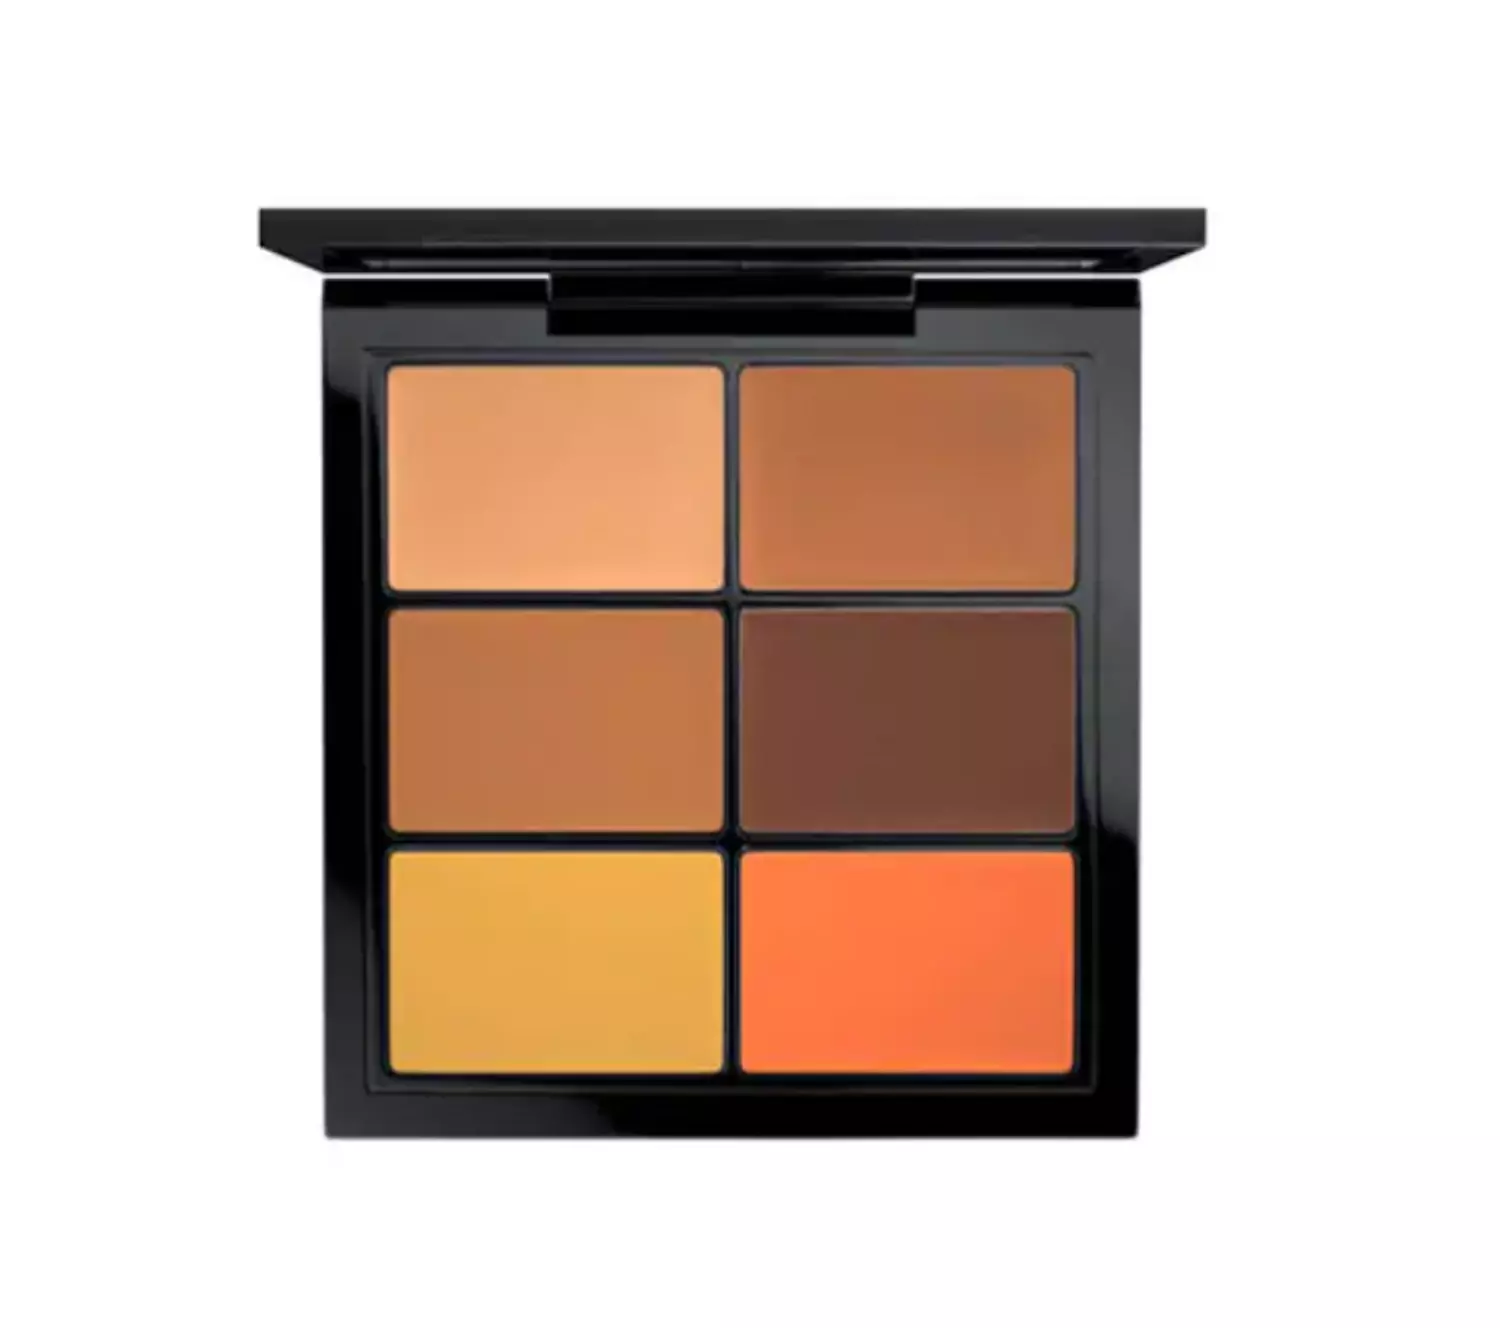 STUDIO FIX CONCEAL AND CORRECT PALETTE | MAC hover image